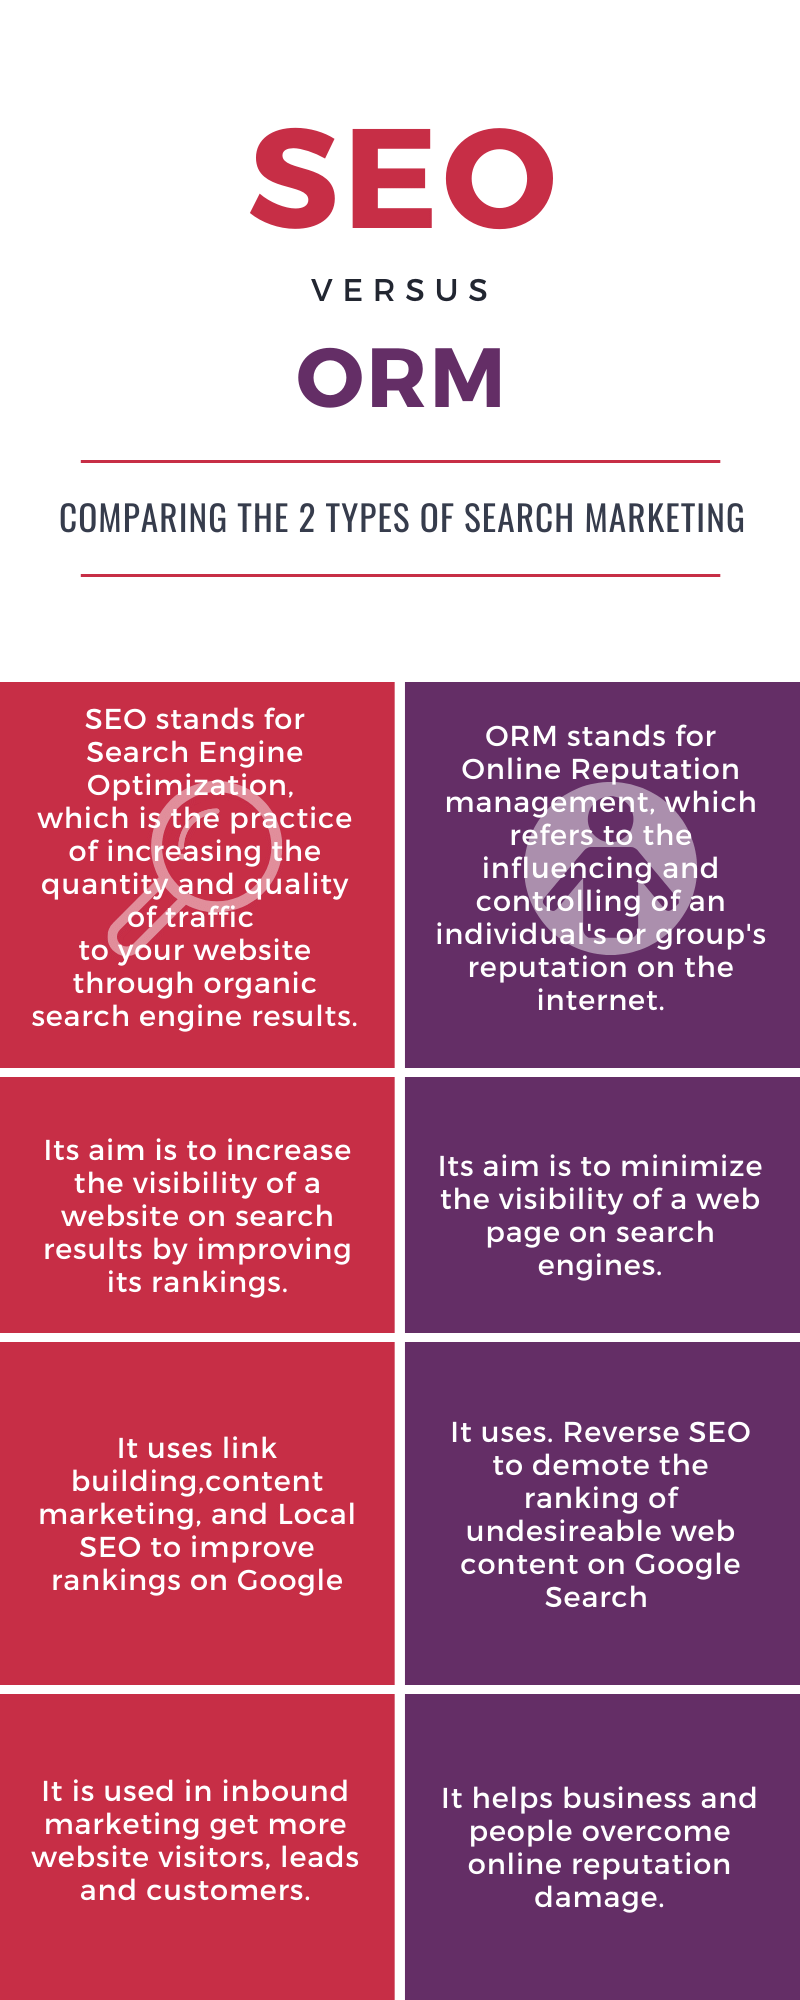 SEO and ORM Infographic